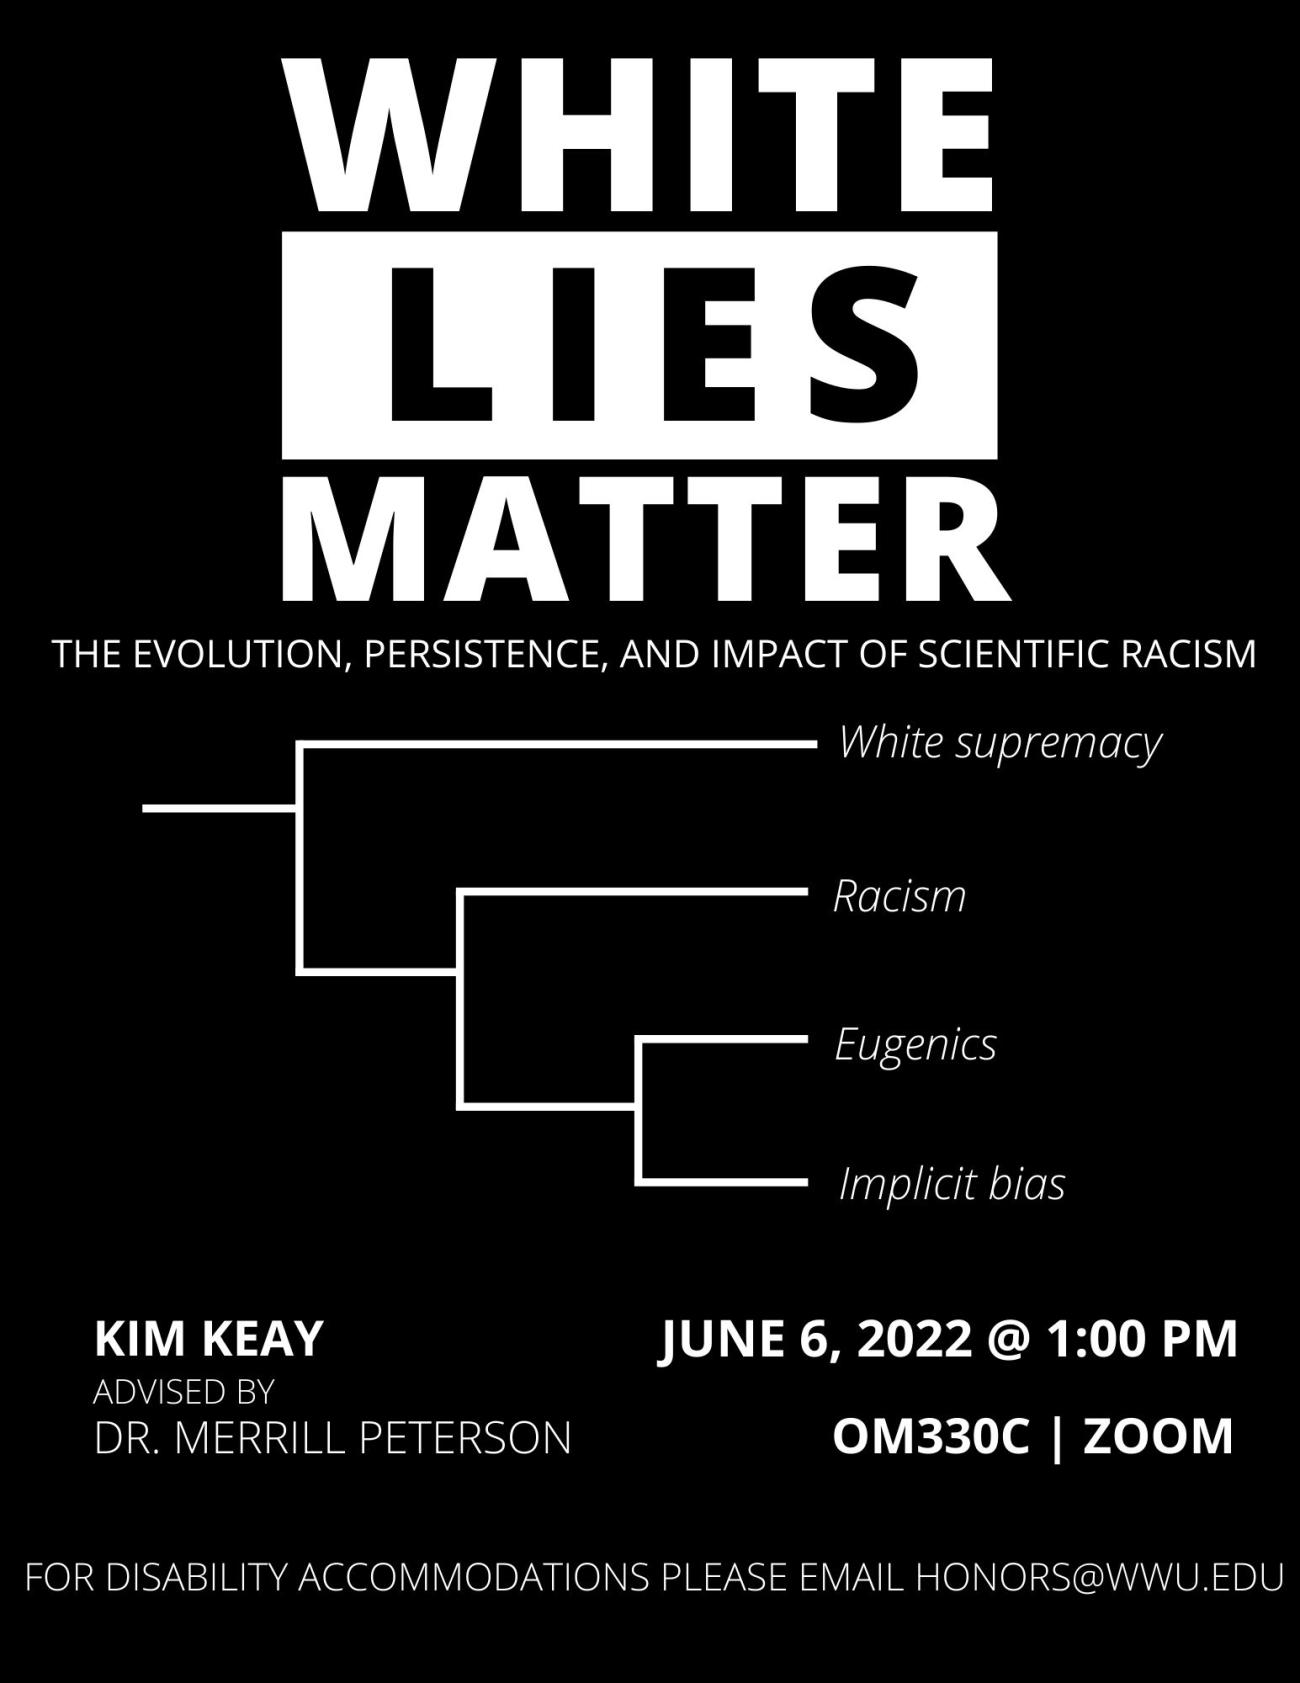 A poster with a black background and a graphic of a phylogenetic tree with four branches ending with the terms: "White supremacy," "Racism," "Eugenics," and "Implicit bias." The title reads "White Lies Matter" in all capital letters with "Lies" in black font over a white rectangle. More text reads: "The Evolution, Persistence, and Impact of Scientific Racism. Kim Keay, Advised by Dr. Merrill Peterson. June 6, 2022 @ 1:00 PM. OM330C or ZOOM. For disability accommodations please email honors@wwu.edu."